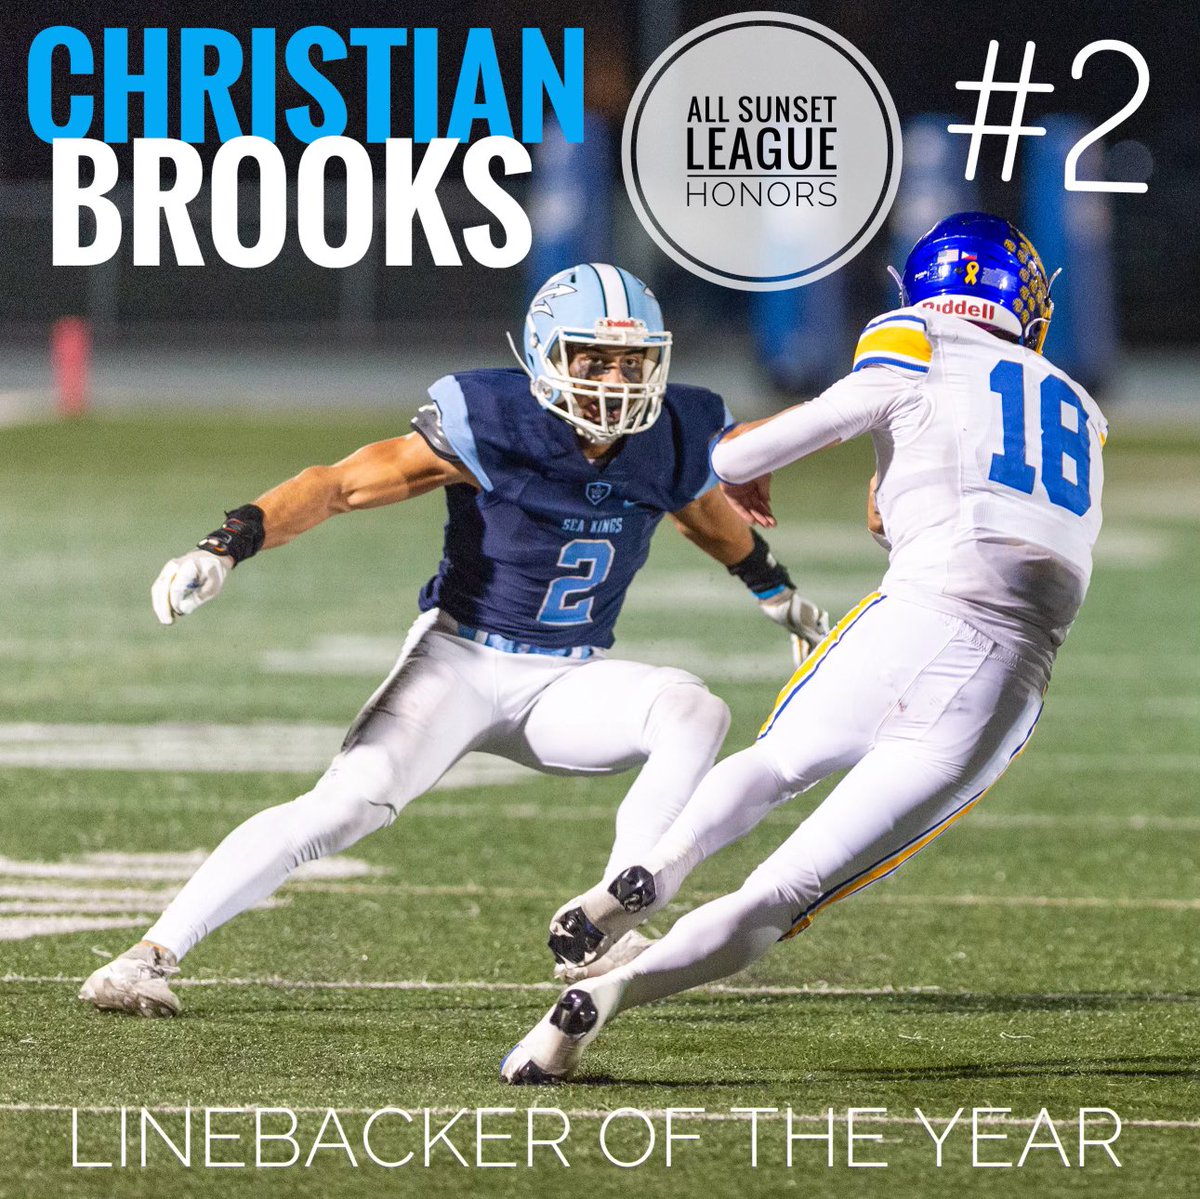 Congrats to Christian Brooks on being named the Sunset League Linebacker of the Year! A true leader on and off the field with character that represents the high standards of CDM Football.